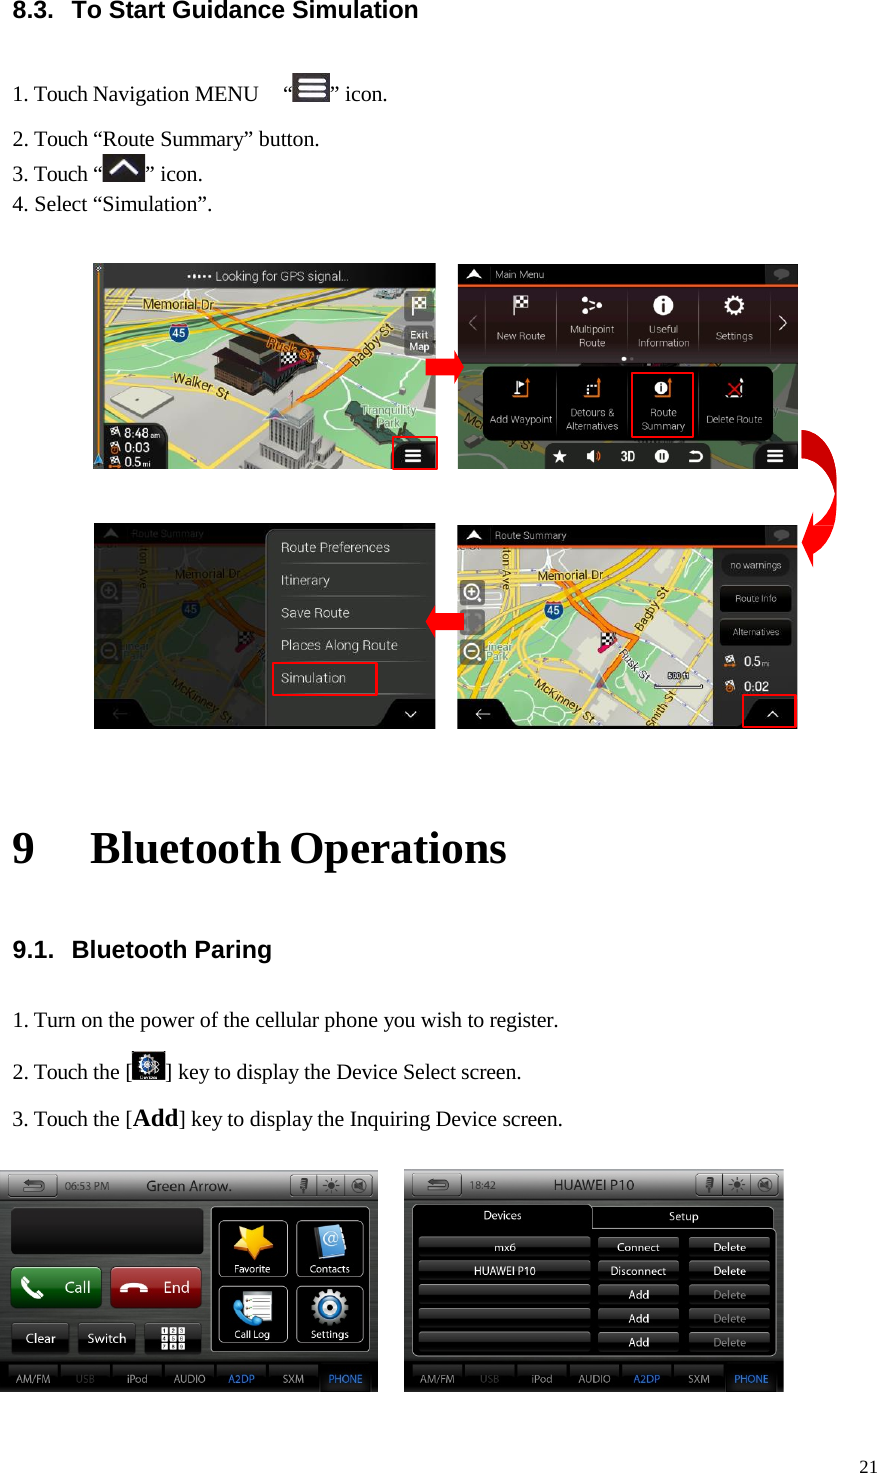 21  8.3. To Start Guidance Simulation   1. Touch Navigation MENU  “ ” icon. 2. Touch “Route Summary” button. 3. Touch “ ” icon. 4. Select “Simulation”.       9 Bluetooth Operations  9.1. Bluetooth Paring  1. Turn on the power of the cellular phone you wish to register.  2. Touch the [ ] key to display the Device Select screen. 3. Touch the [Add] key to display the Inquiring Device screen.        